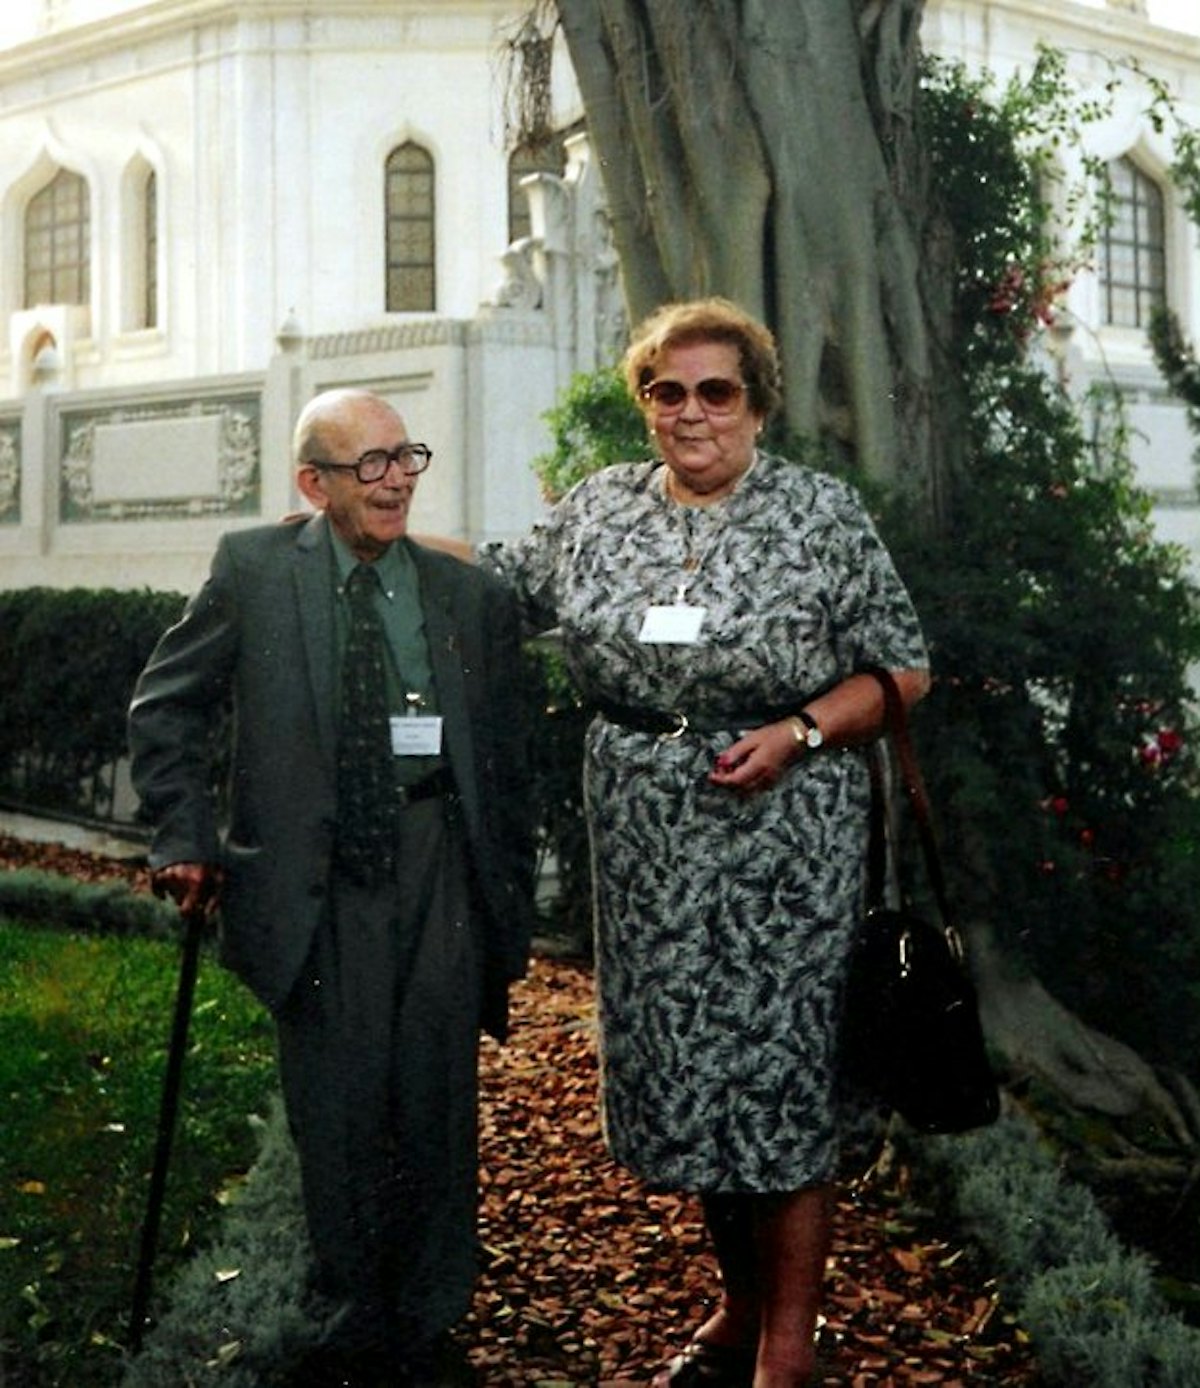 Andorra Baha'is near the Shrine of the Bab in Haifa, Israel, 1992...Carmen Tost Xifre de Mingorance (right) and Emili Armengol Theron. Mrs. Mingorance and her husband, Jose Mingorance Fernandez, were the first residents of Andorra to become Baha'is.